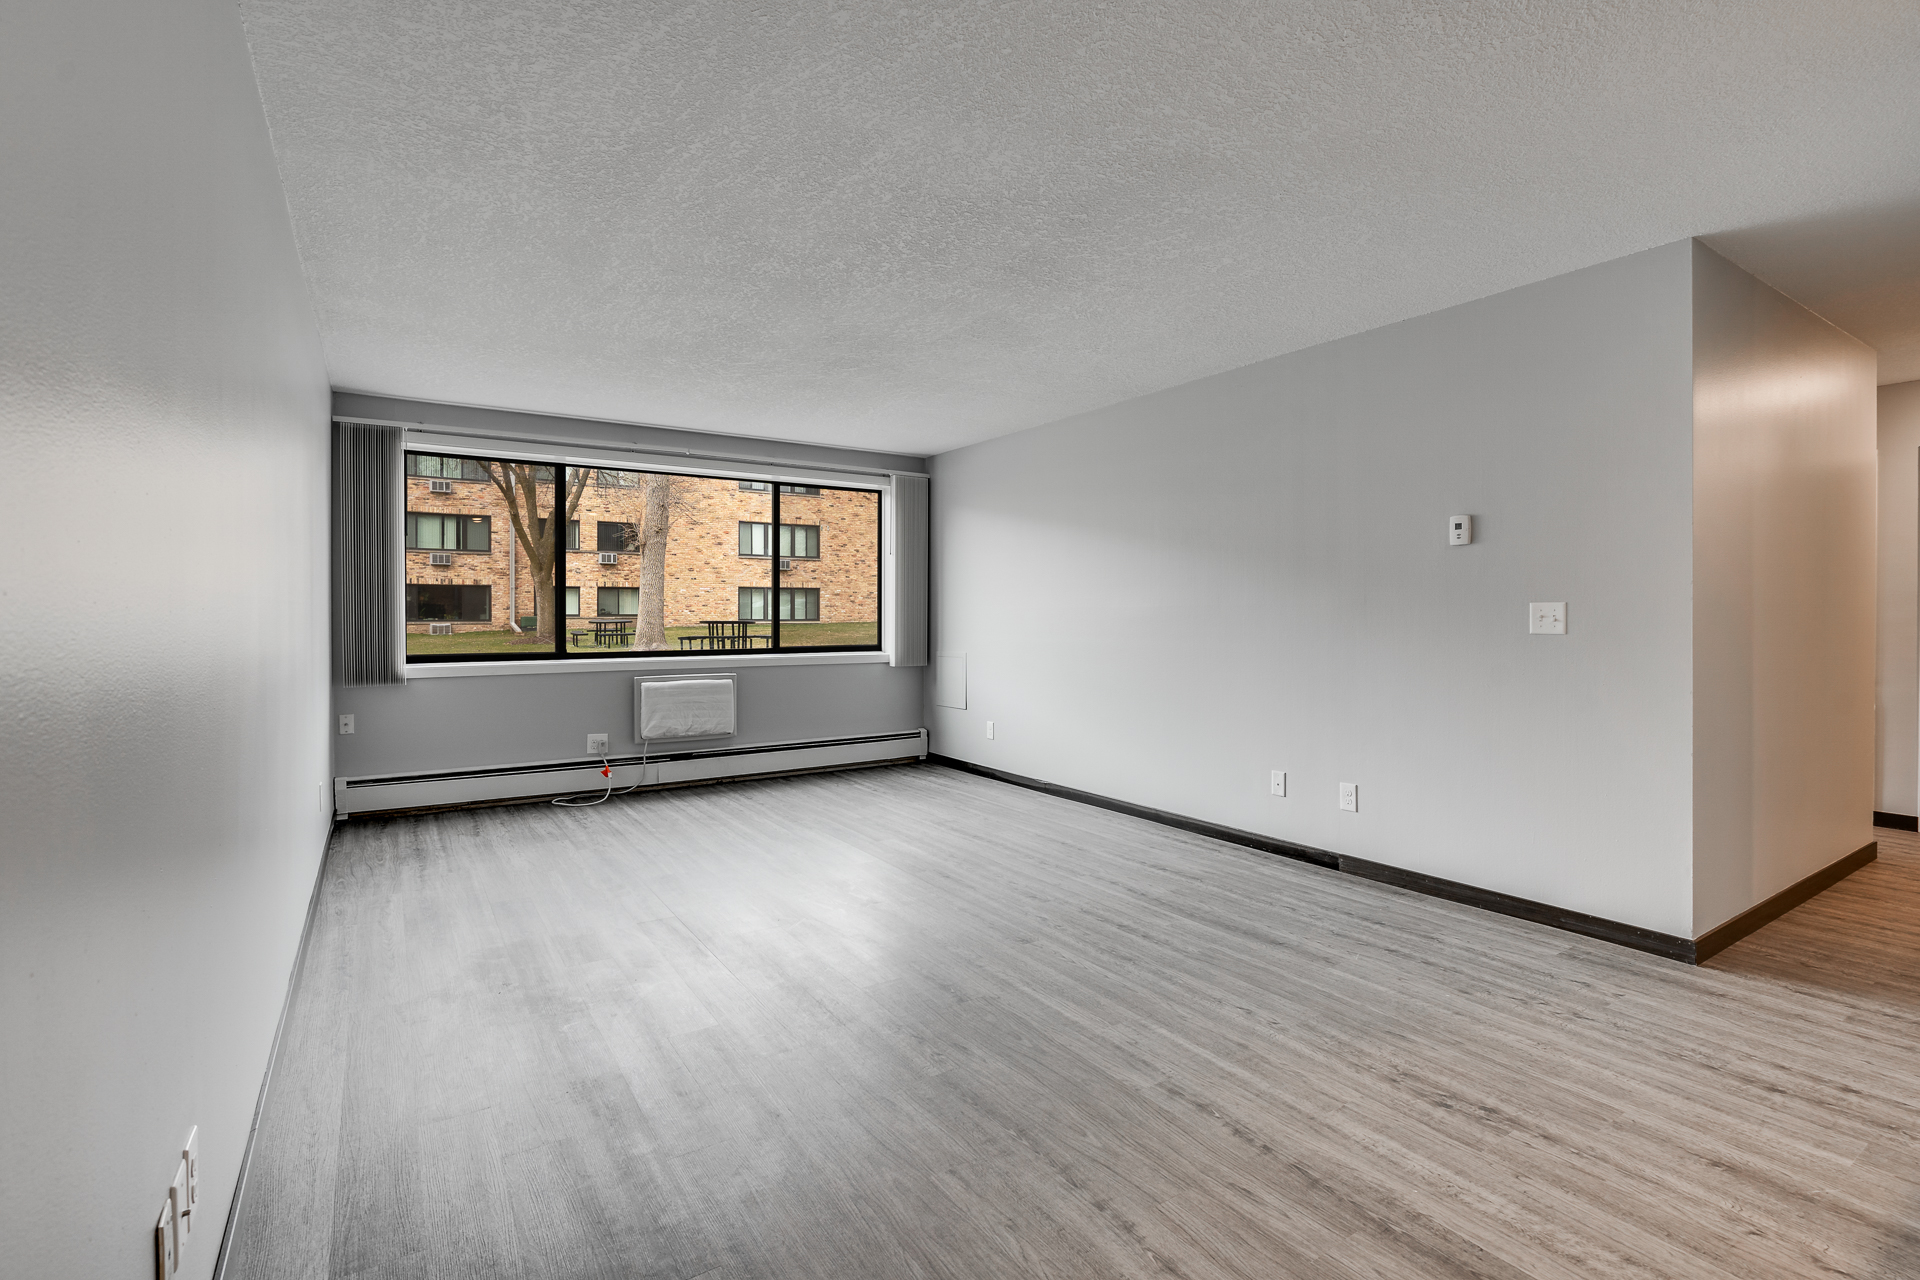 Empty living room with a wall of windows looking out on the grassy commons